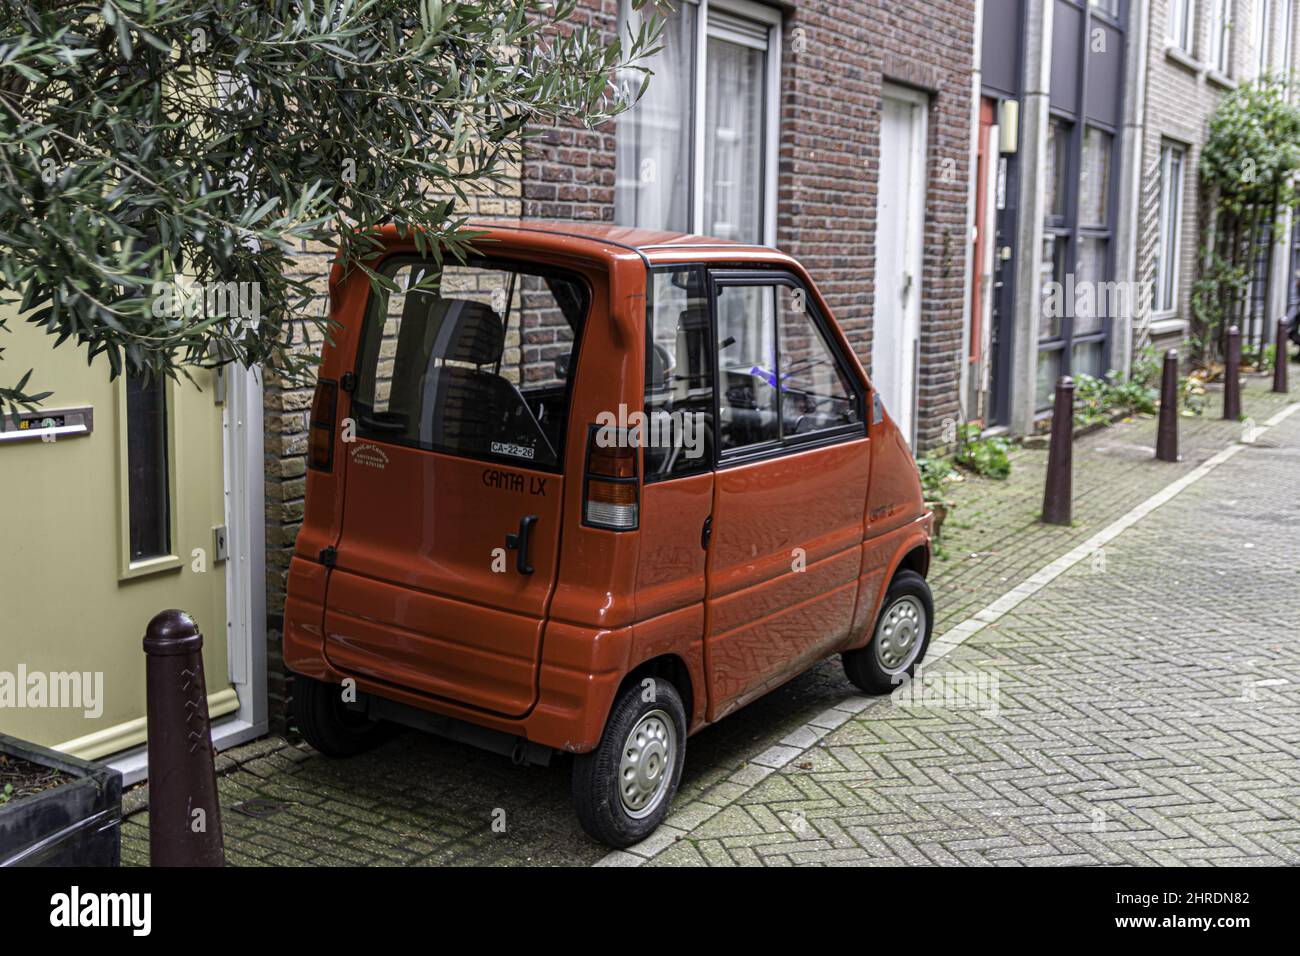 Little minicar canta XL parked in the street Stock Photo